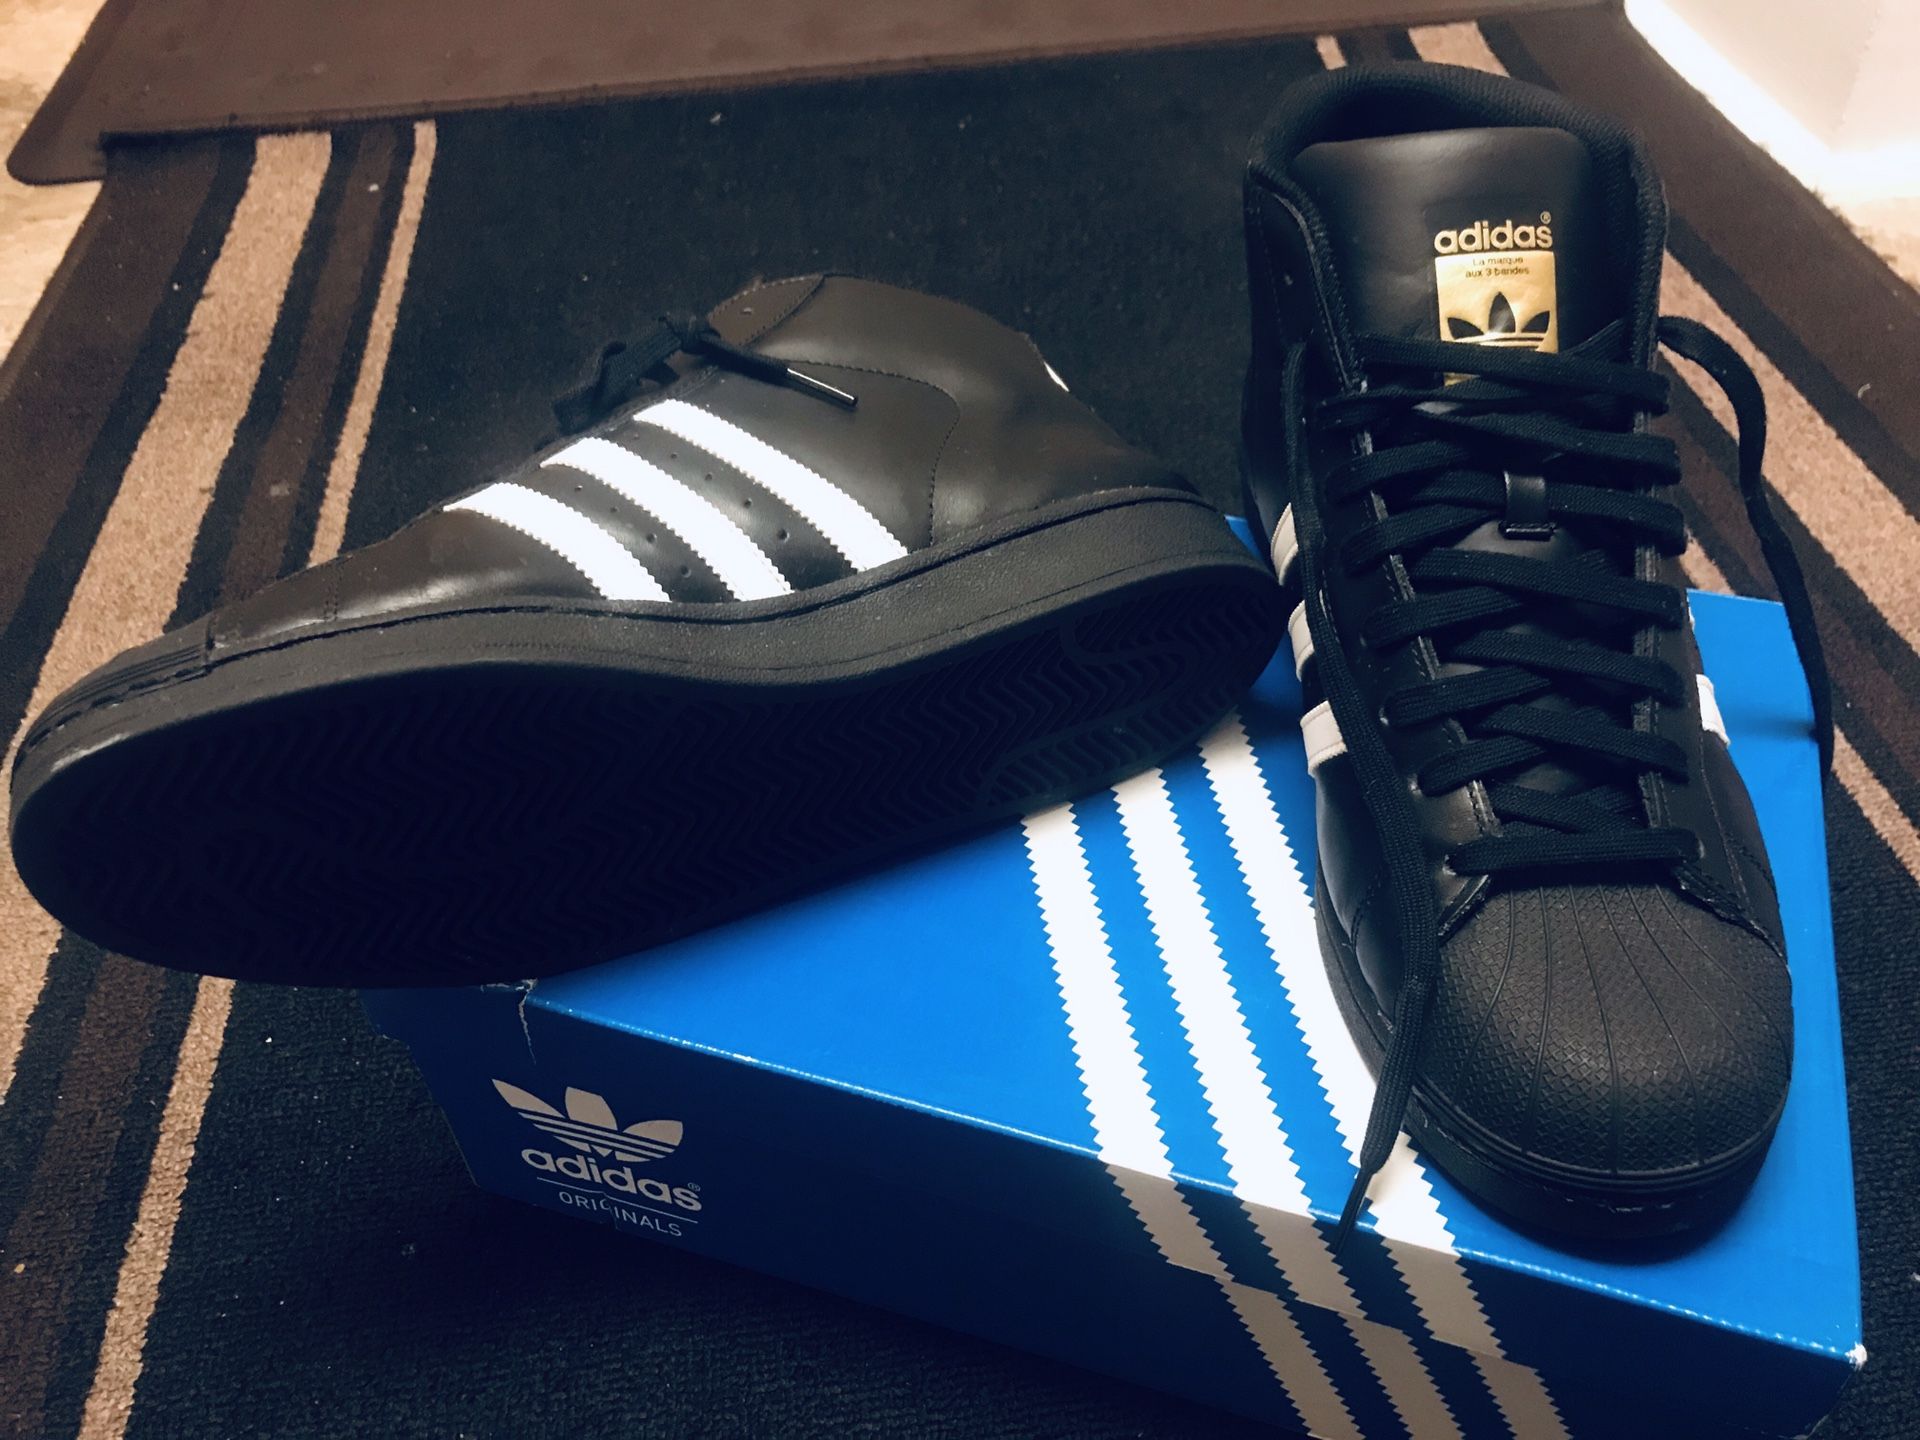 Adidas ankle length (Size 11).